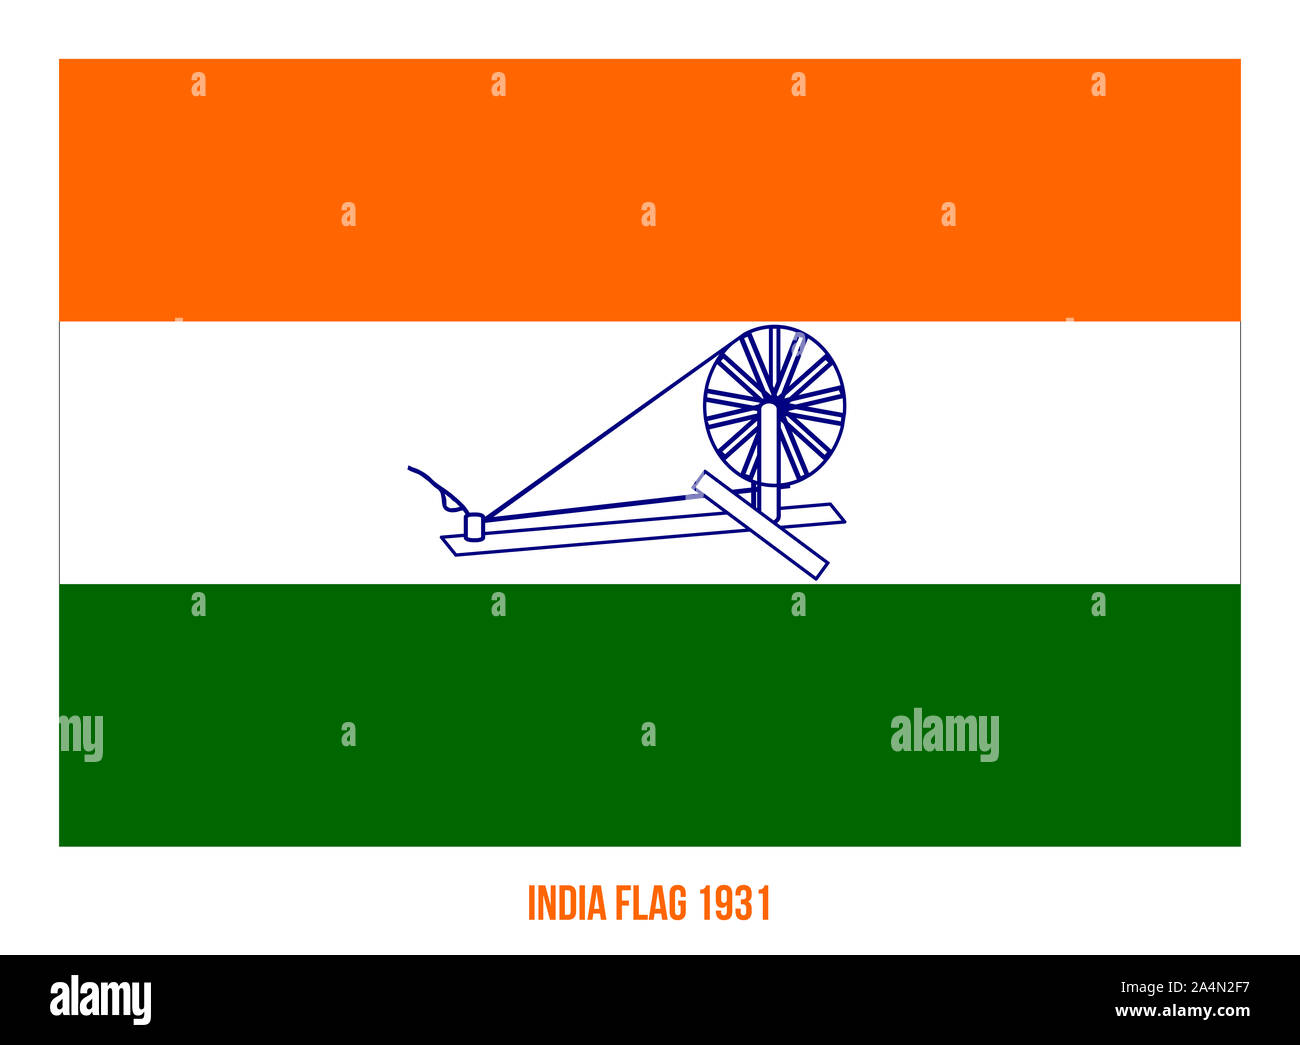 India Flag Waving 1931 Vector Illustration on White Background. Swaraj Flag Officially Adopted By The Indian National Congress in 1931. Stock Photo